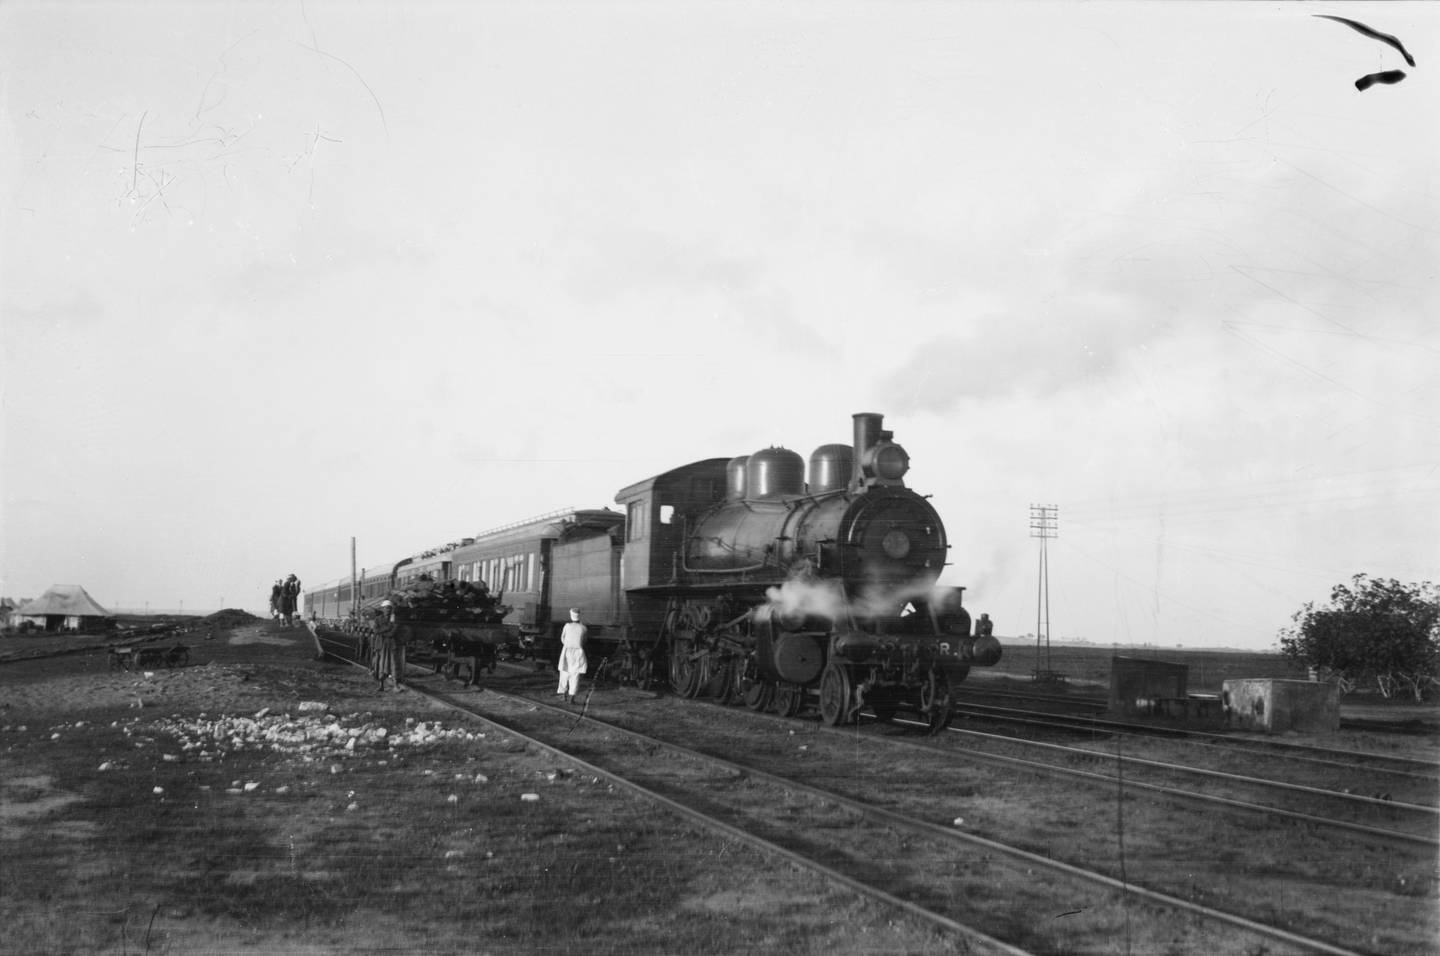 A train travels along the Hejaz Railway between 1900 and 1920 in what was then the Naqab desert of Palestine. Photo: Library of Congress